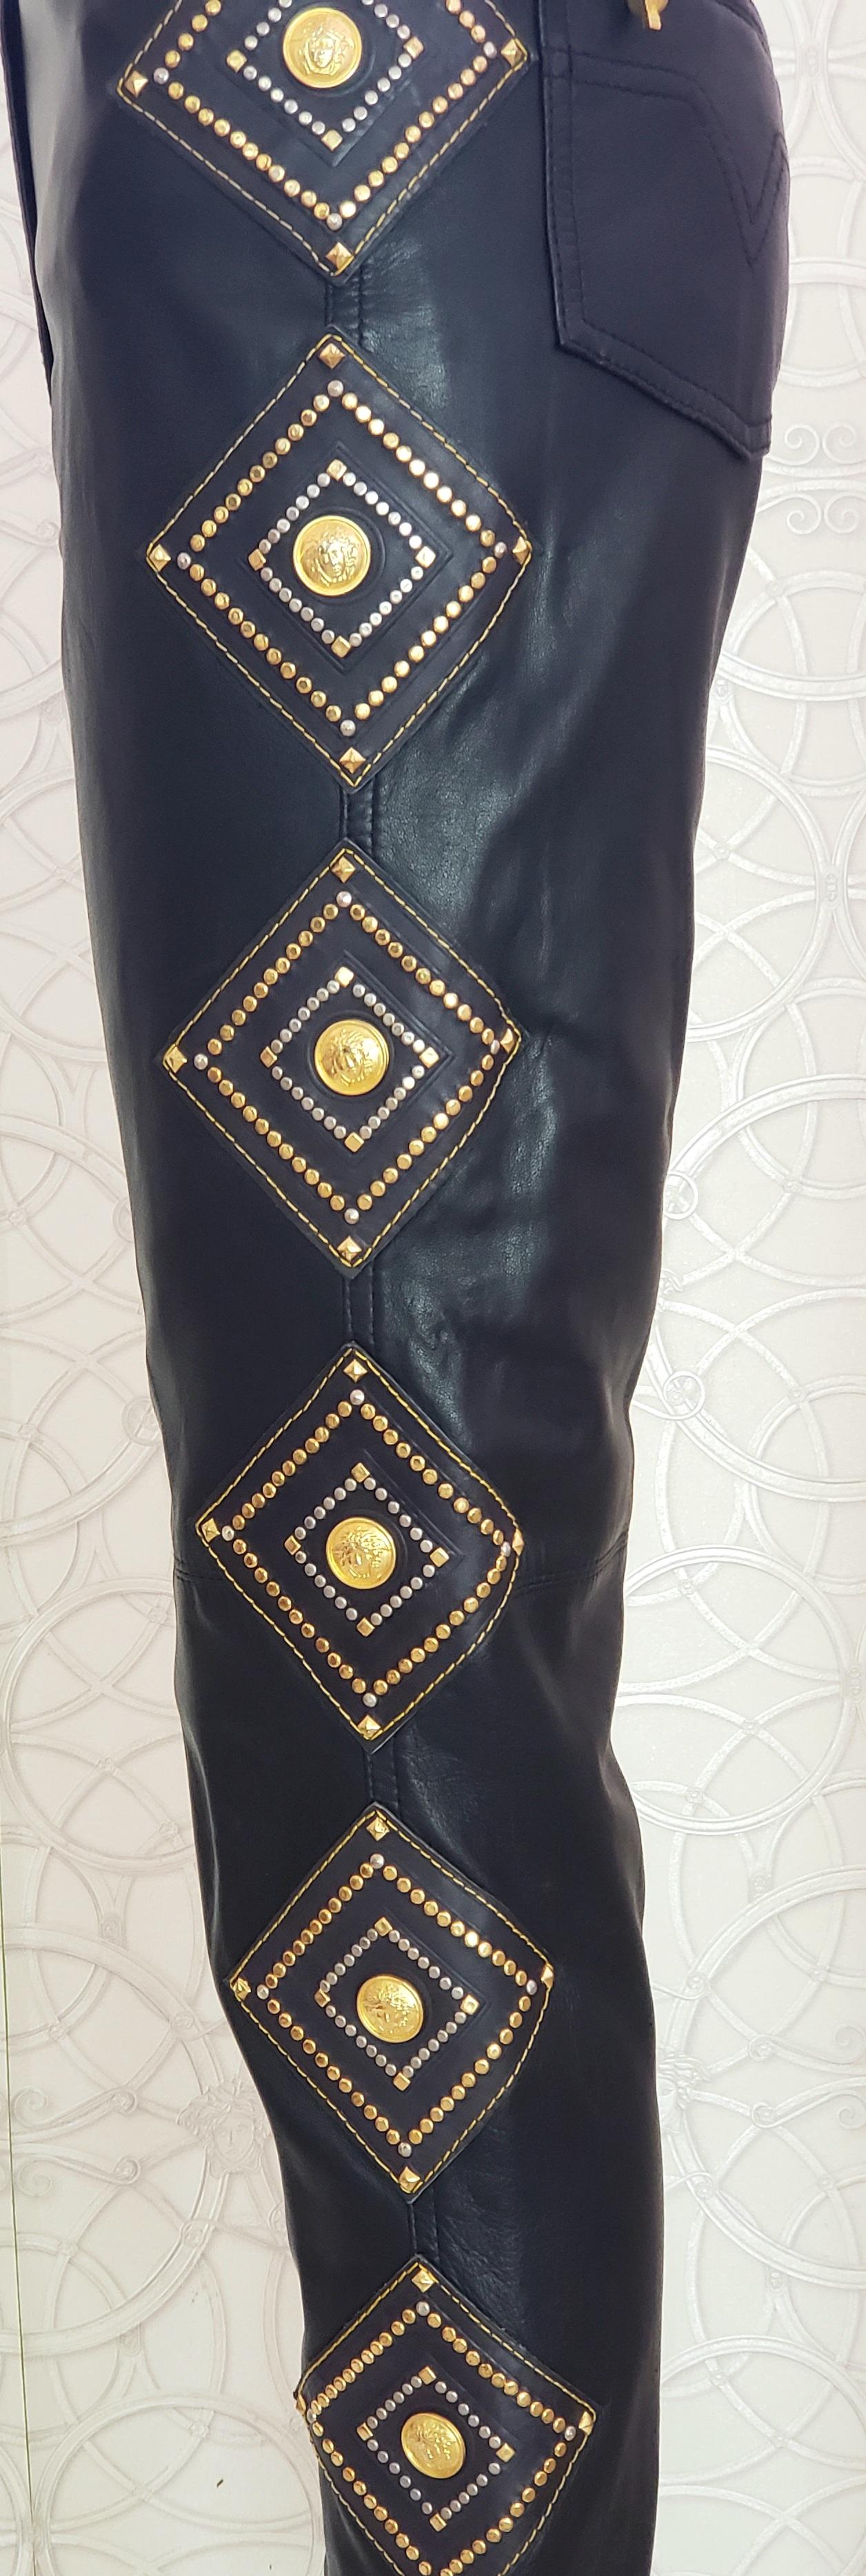 Women's or Men's 1991 GIANNI VERSACE PRIVATE MUSEUM WORTHY COLLECTION BLACK LEATHER STUDDED Pants For Sale